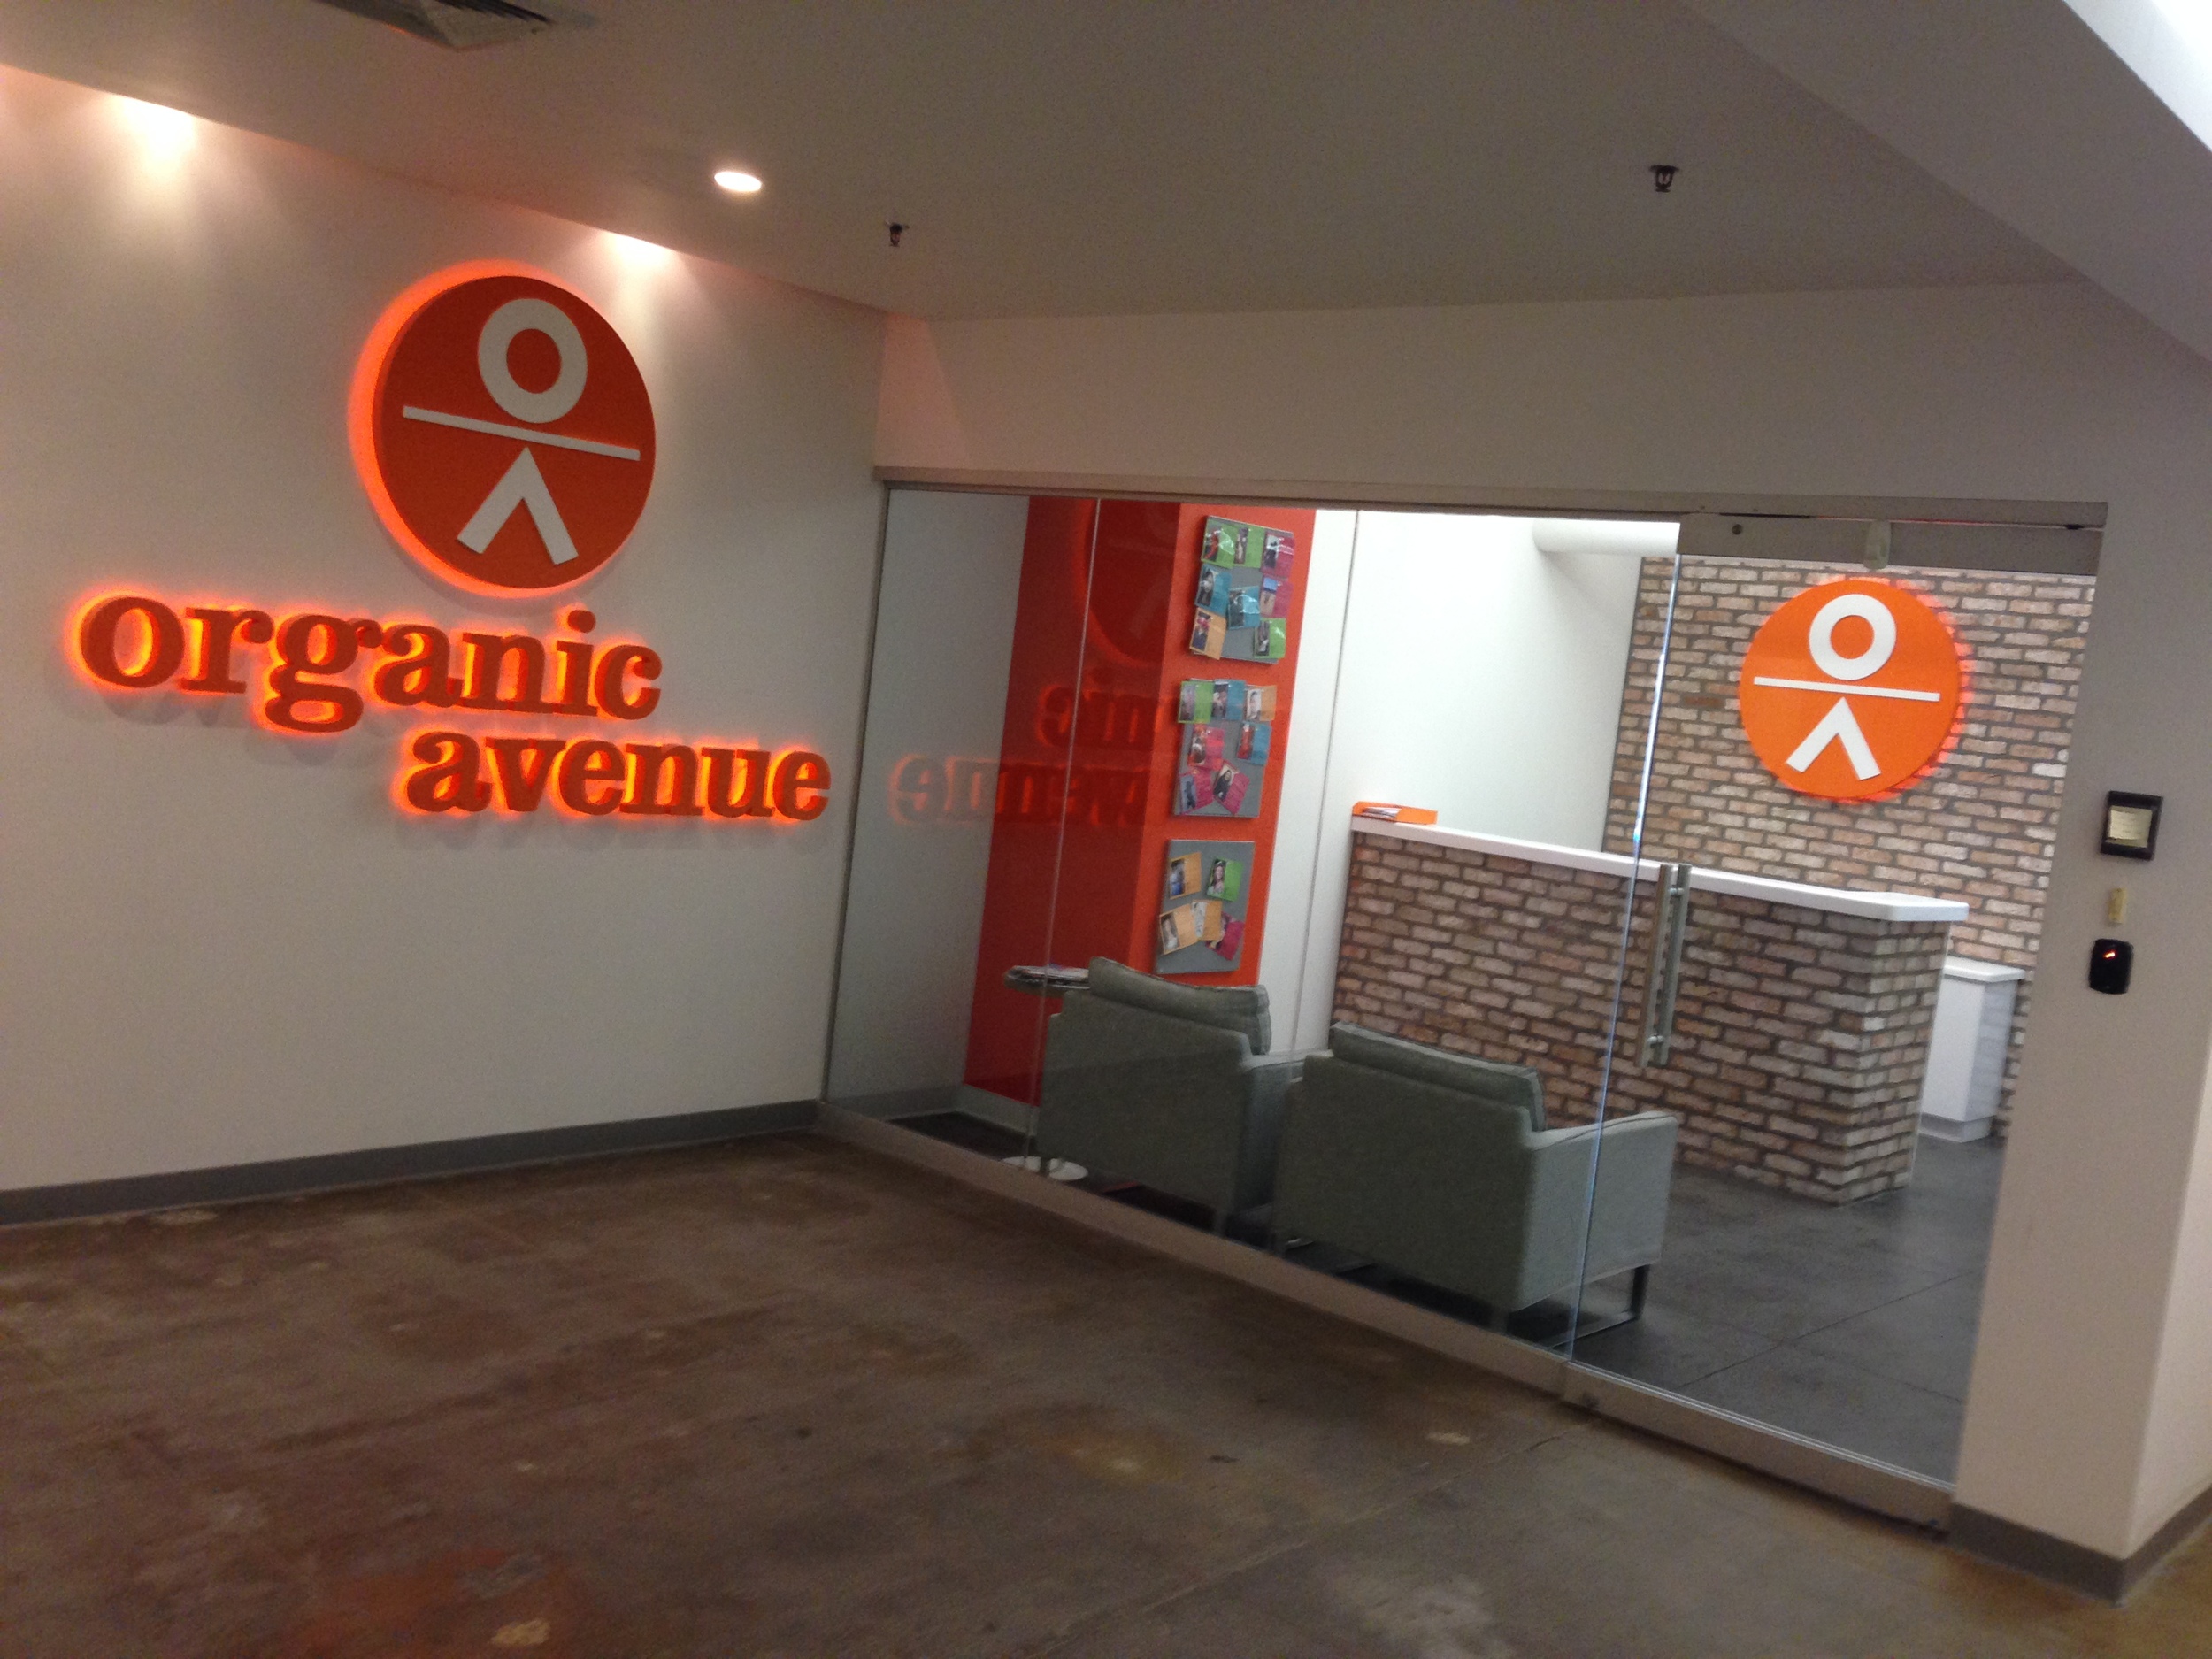 Organic Avenue's Support Center, NYC